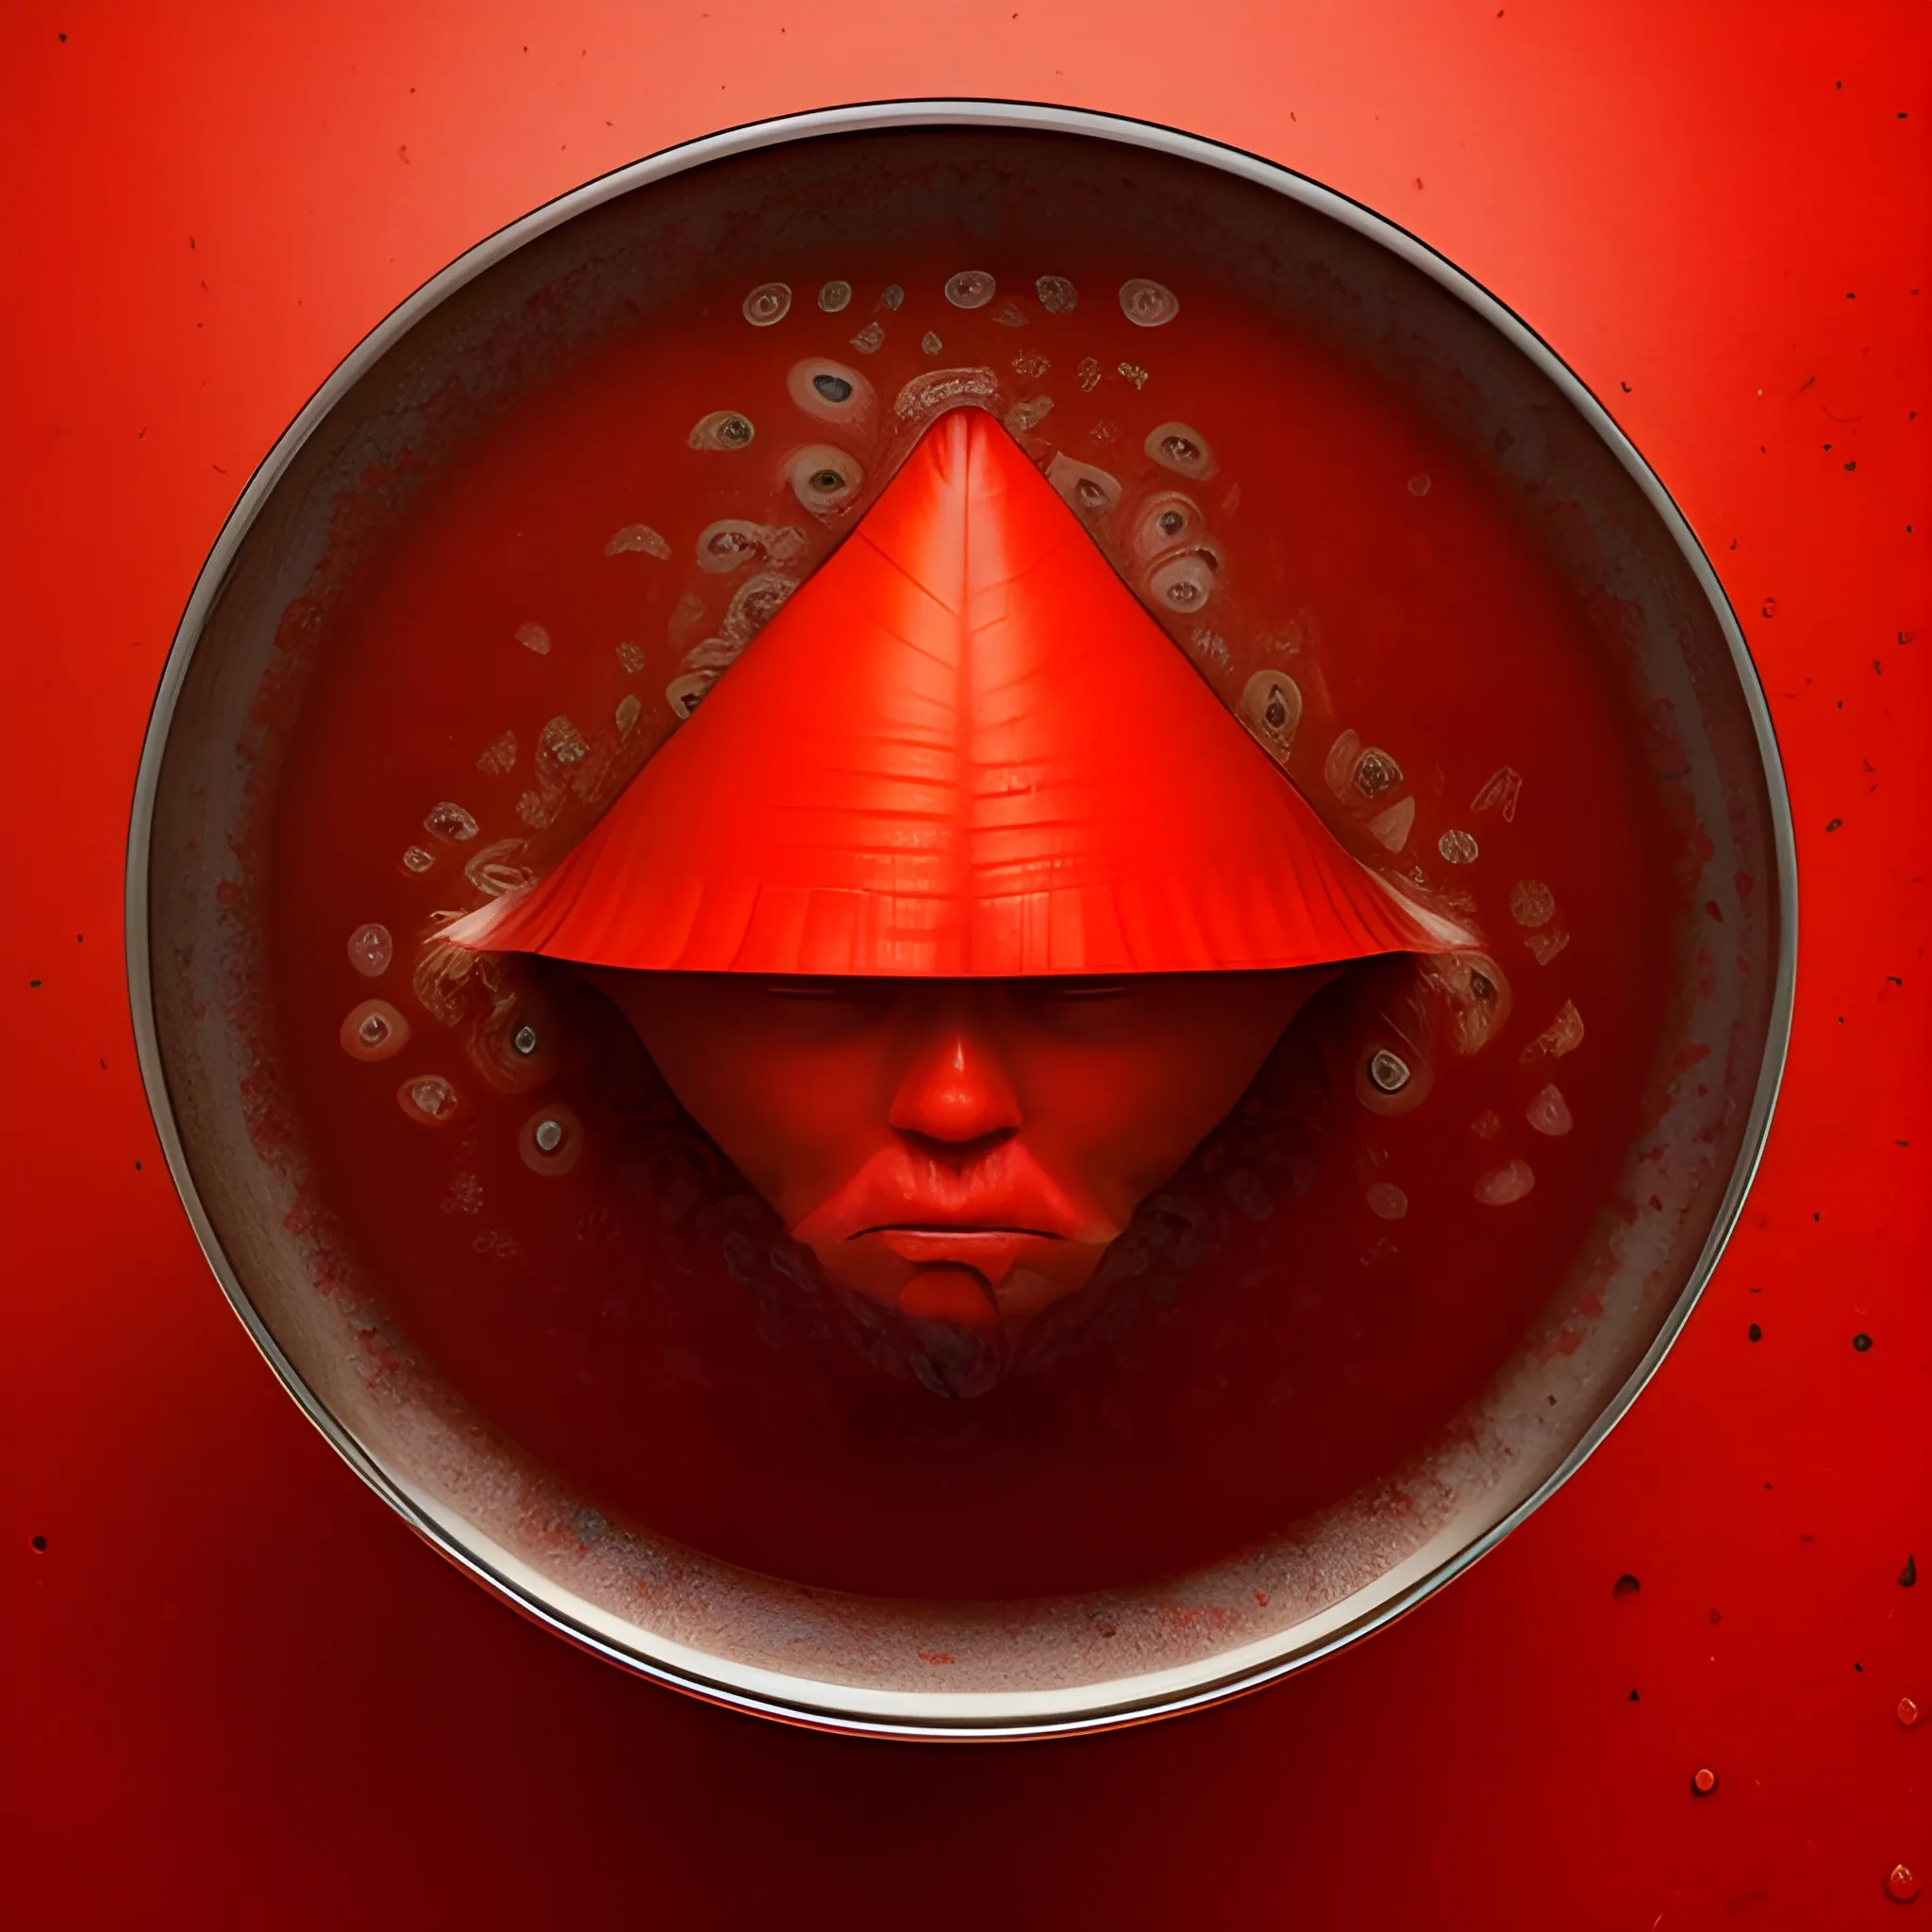 humanized red paper falls in the Mexican red boiling soup, view from above on the same level as second pepper that watches as first pepper falls. Both are sad, Both have faces. Digital art, great quality, UHD, top artist, famous artist work
